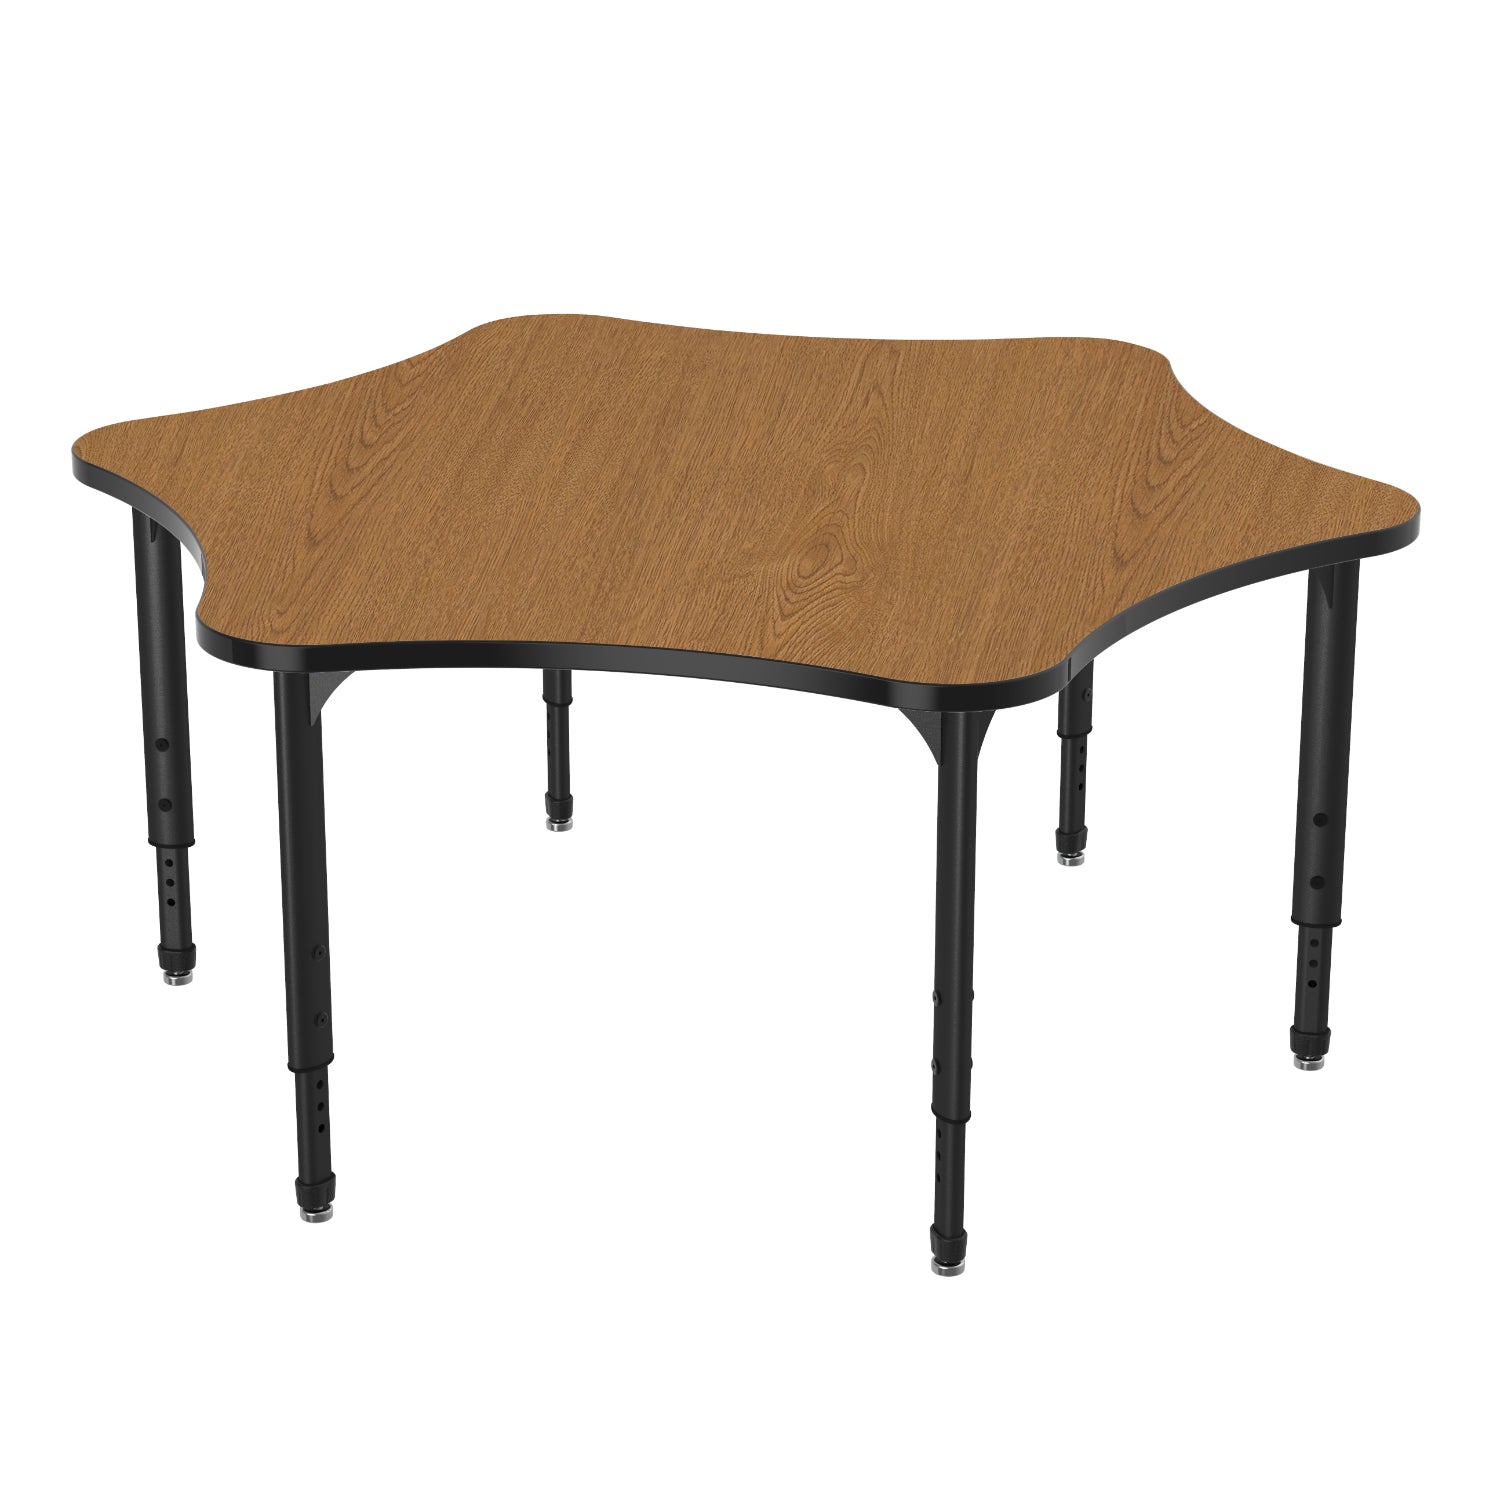 Apex Adjustable Height Collaborative Student Table, 60" 6 Star